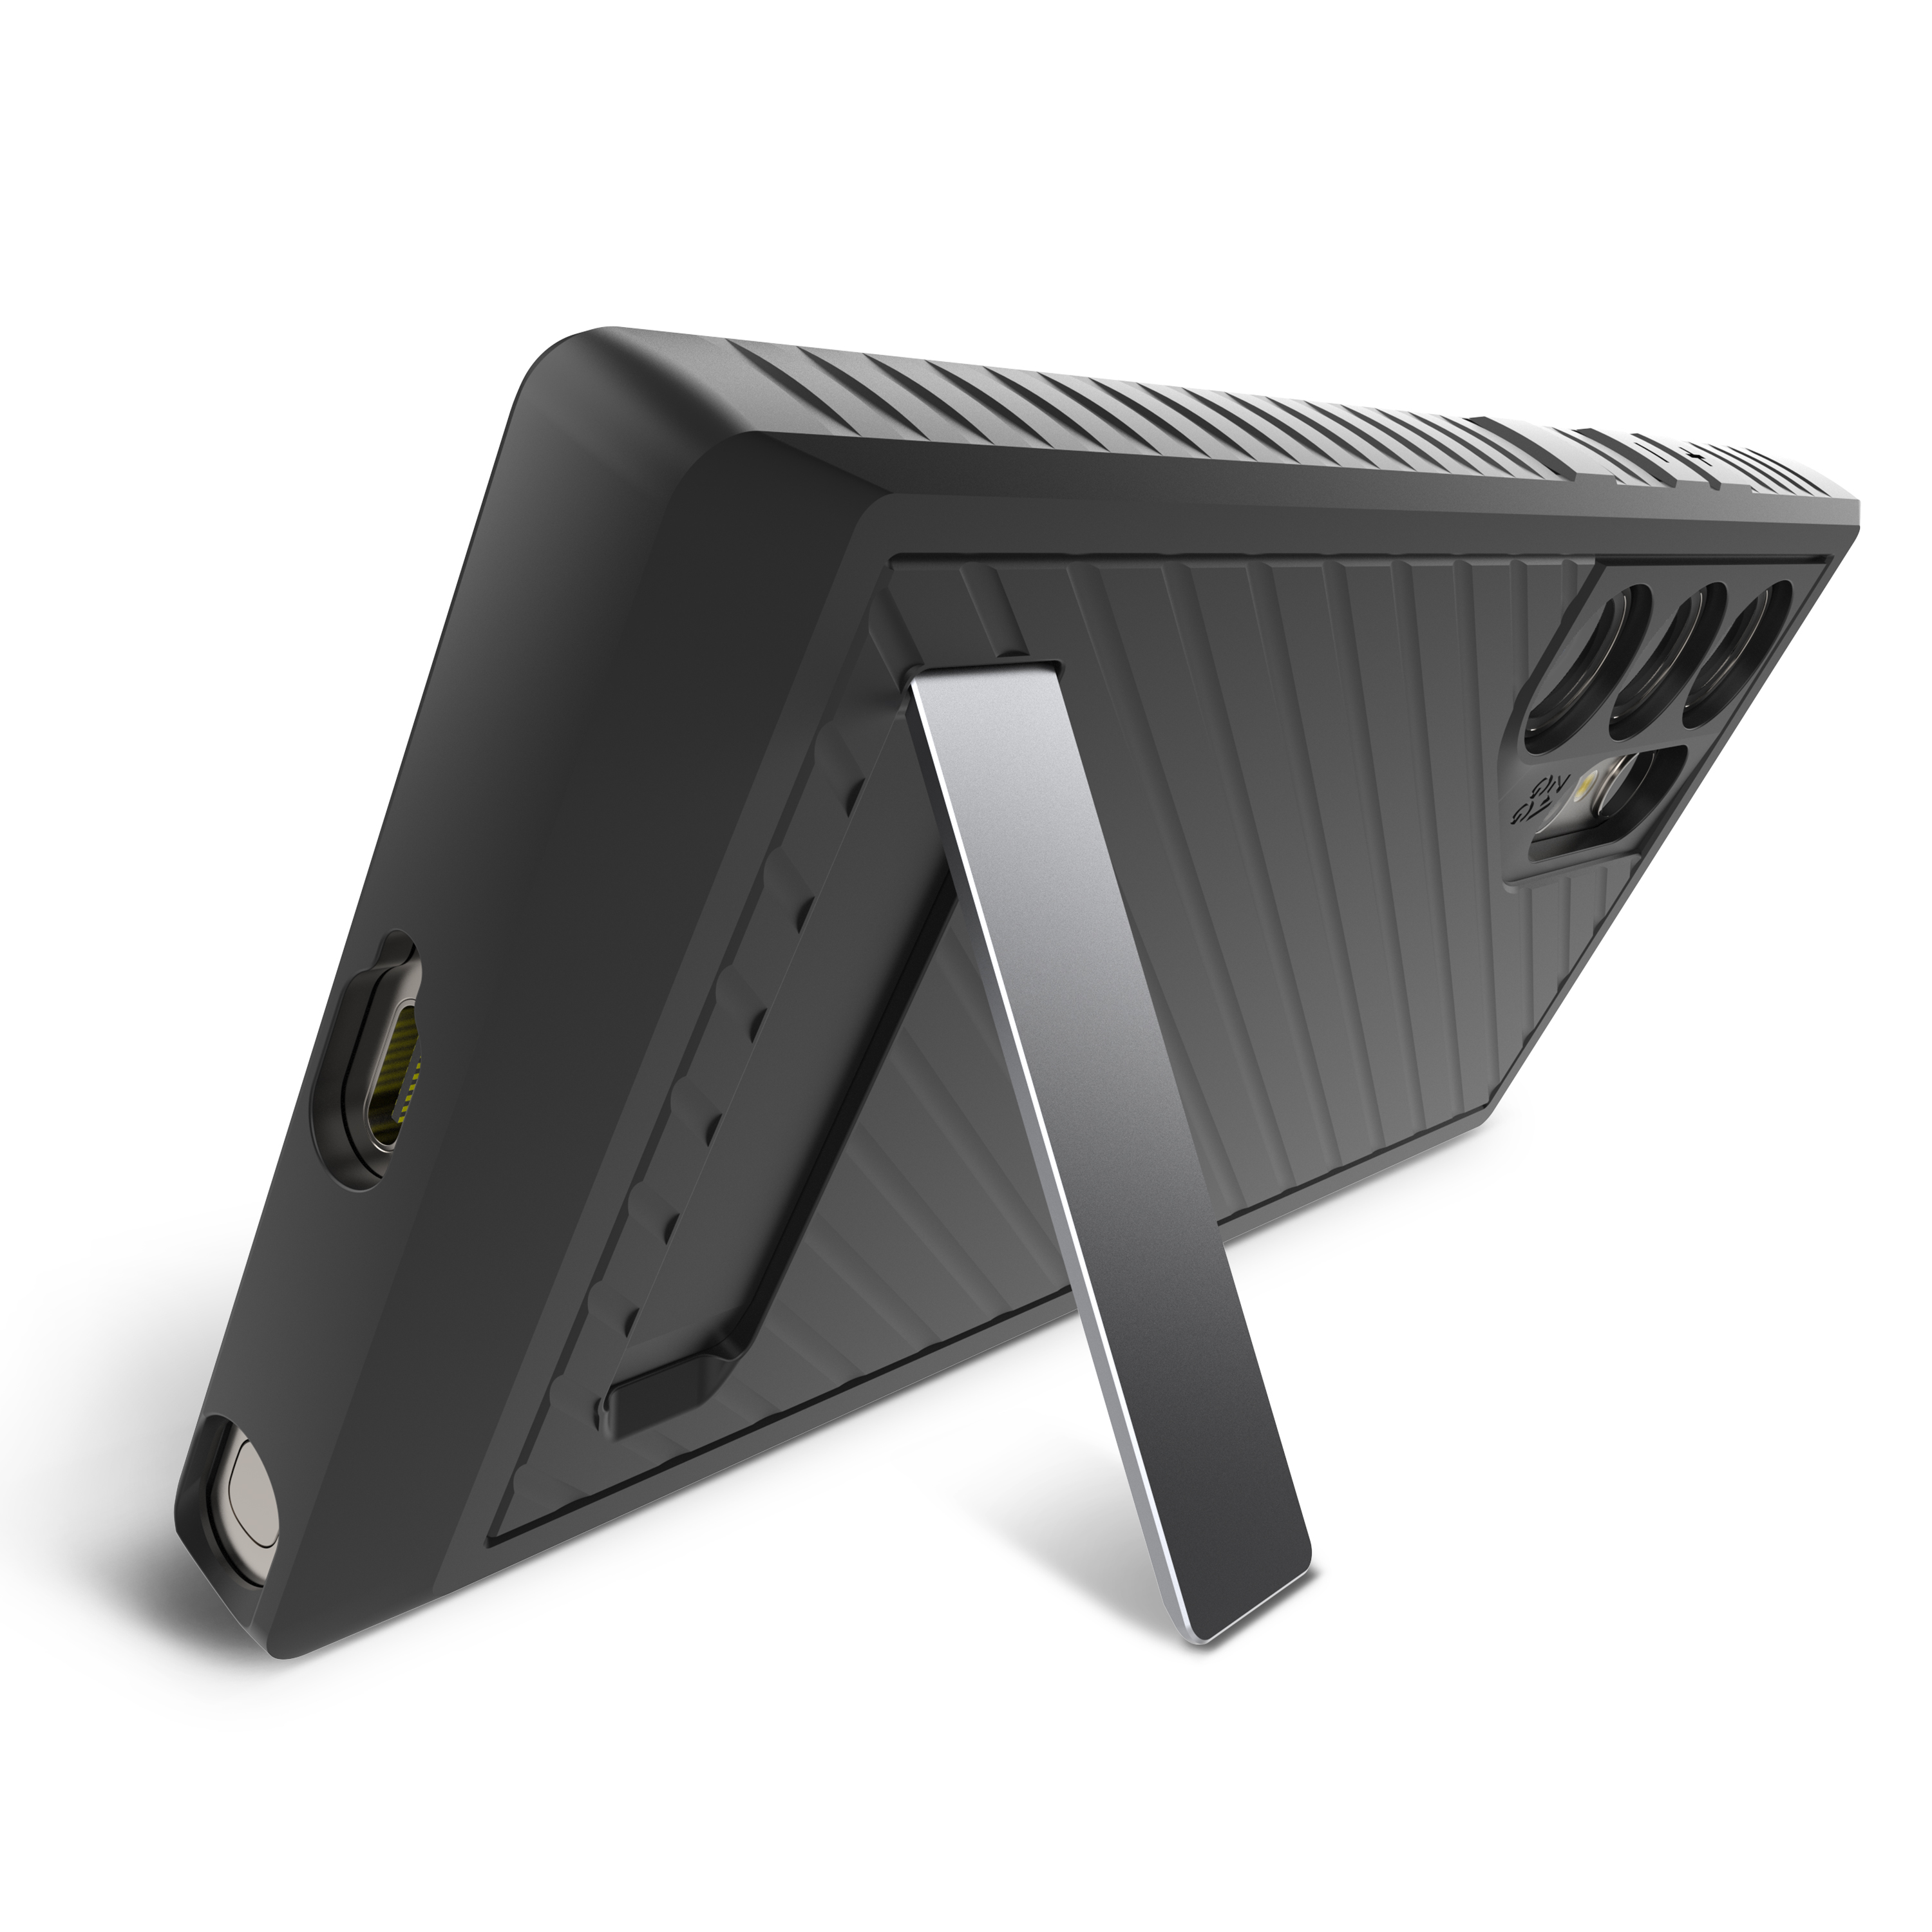 Integrated Kickstand ||
The kickstand allows for hands-free viewing, and it folds back flush with the case